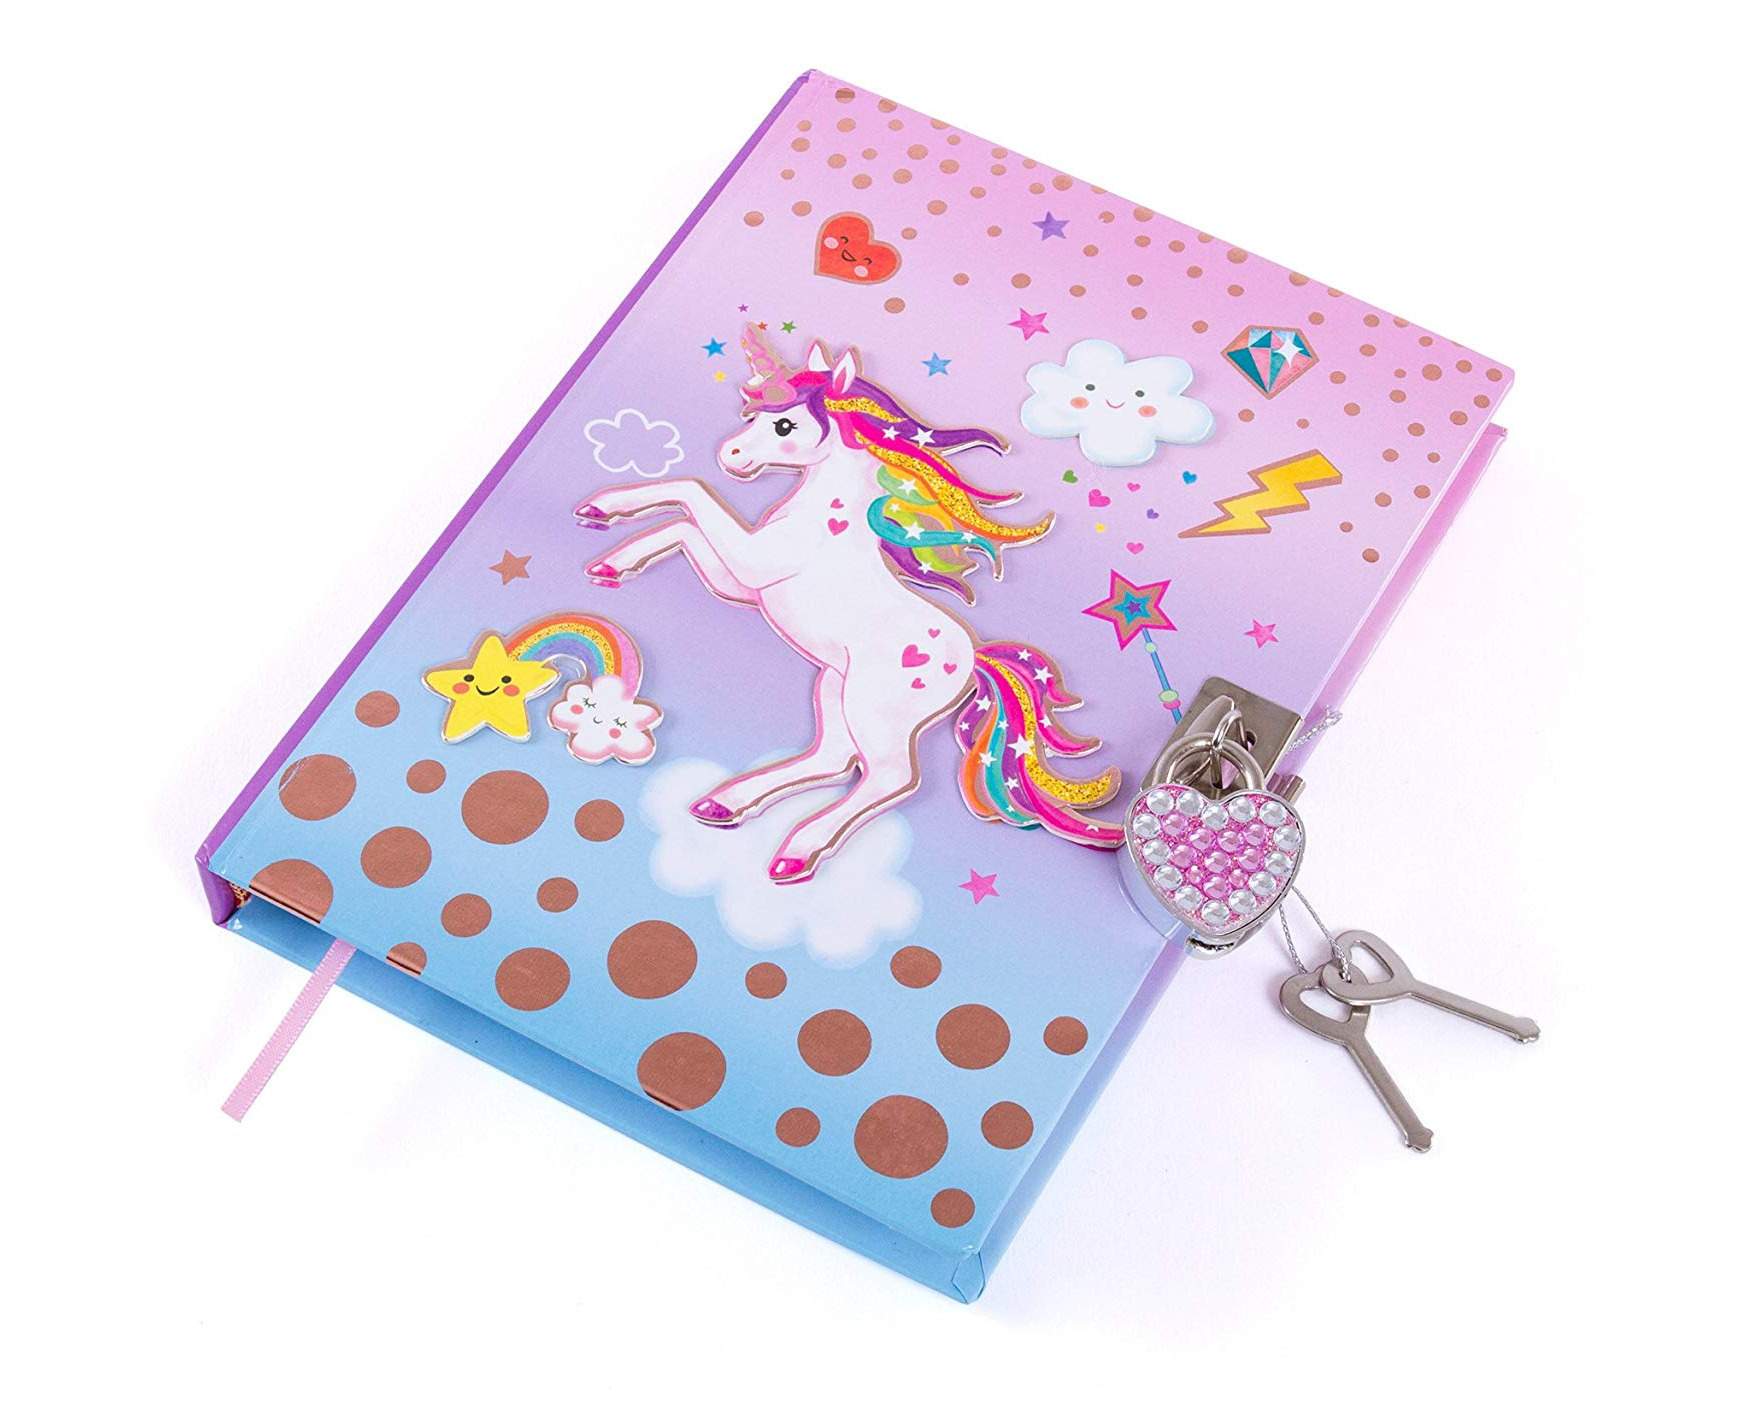 Girls Diary with Lock and Key for Girls Secret Kids Journals for